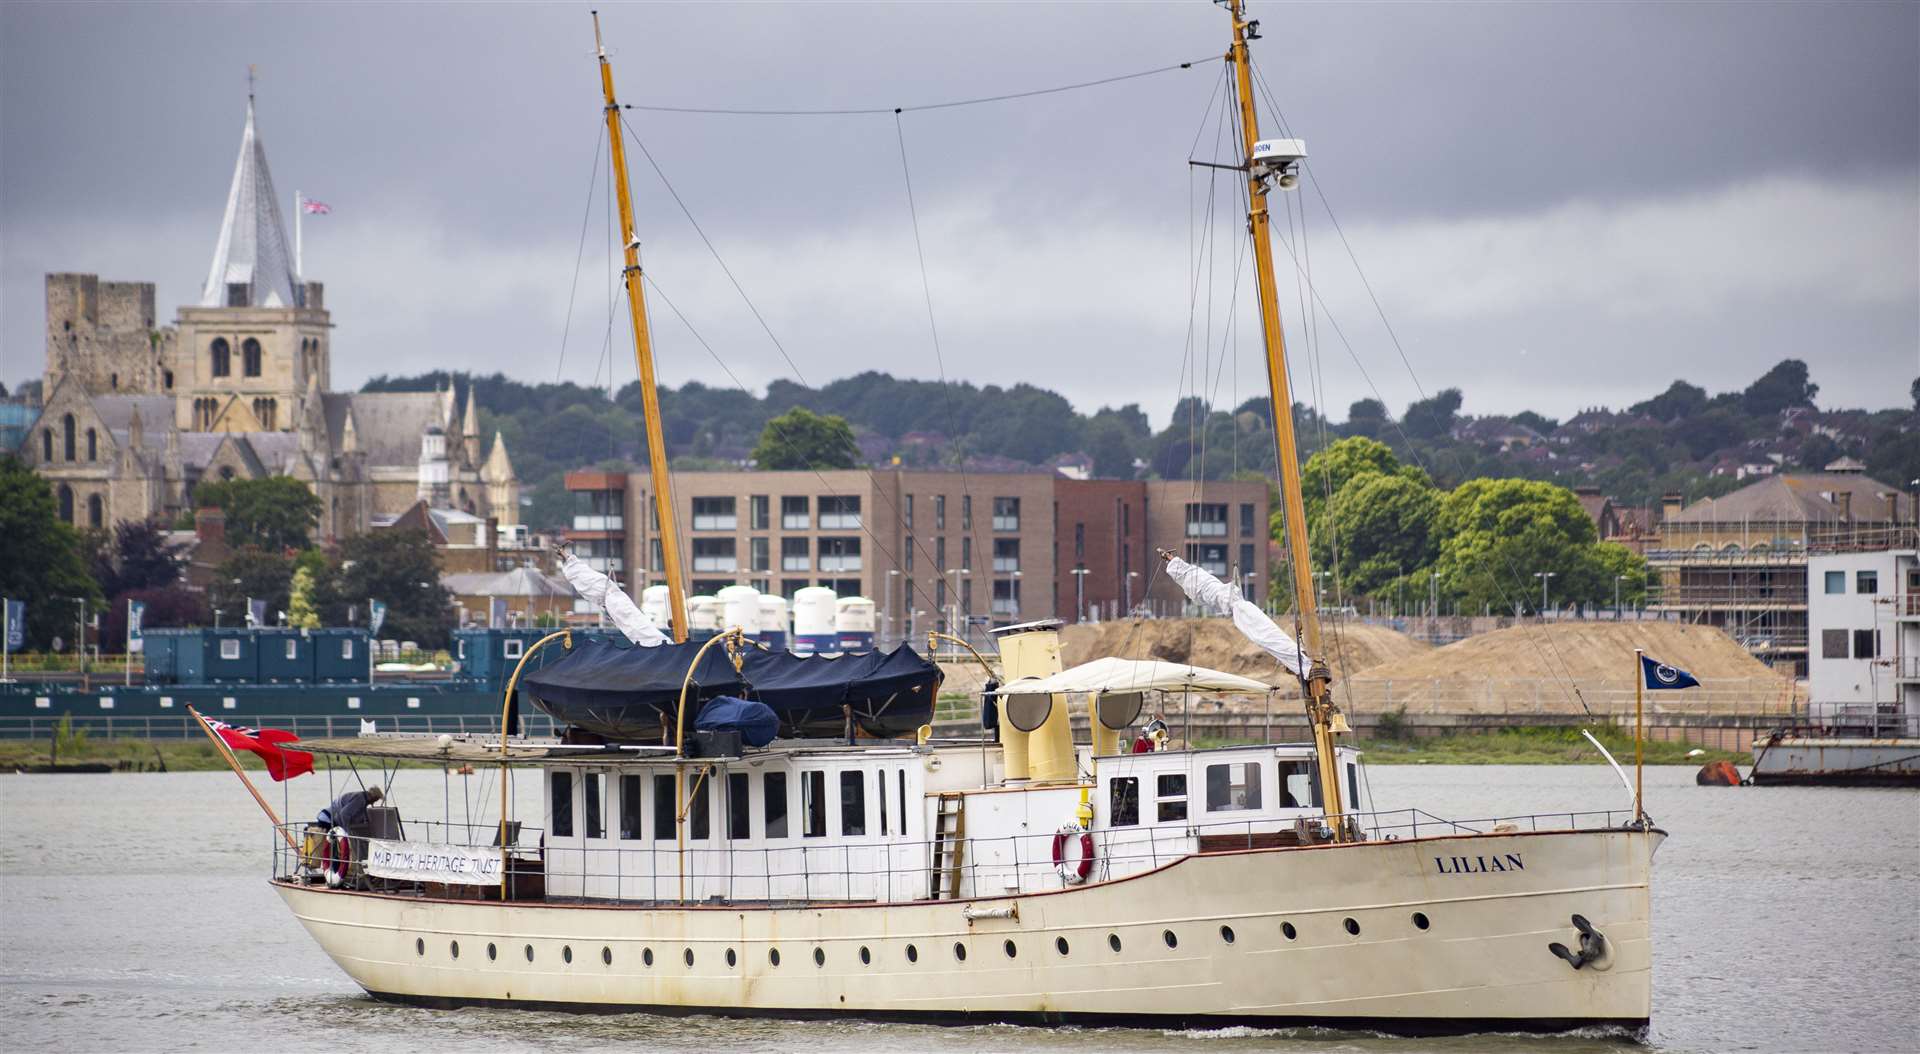 A big weekend of Jubilee celebrations for Medway is planned over the extended bank holiday from Thursday 2 June to Sunday 5 June. Copyright: Mike Jarman Photography